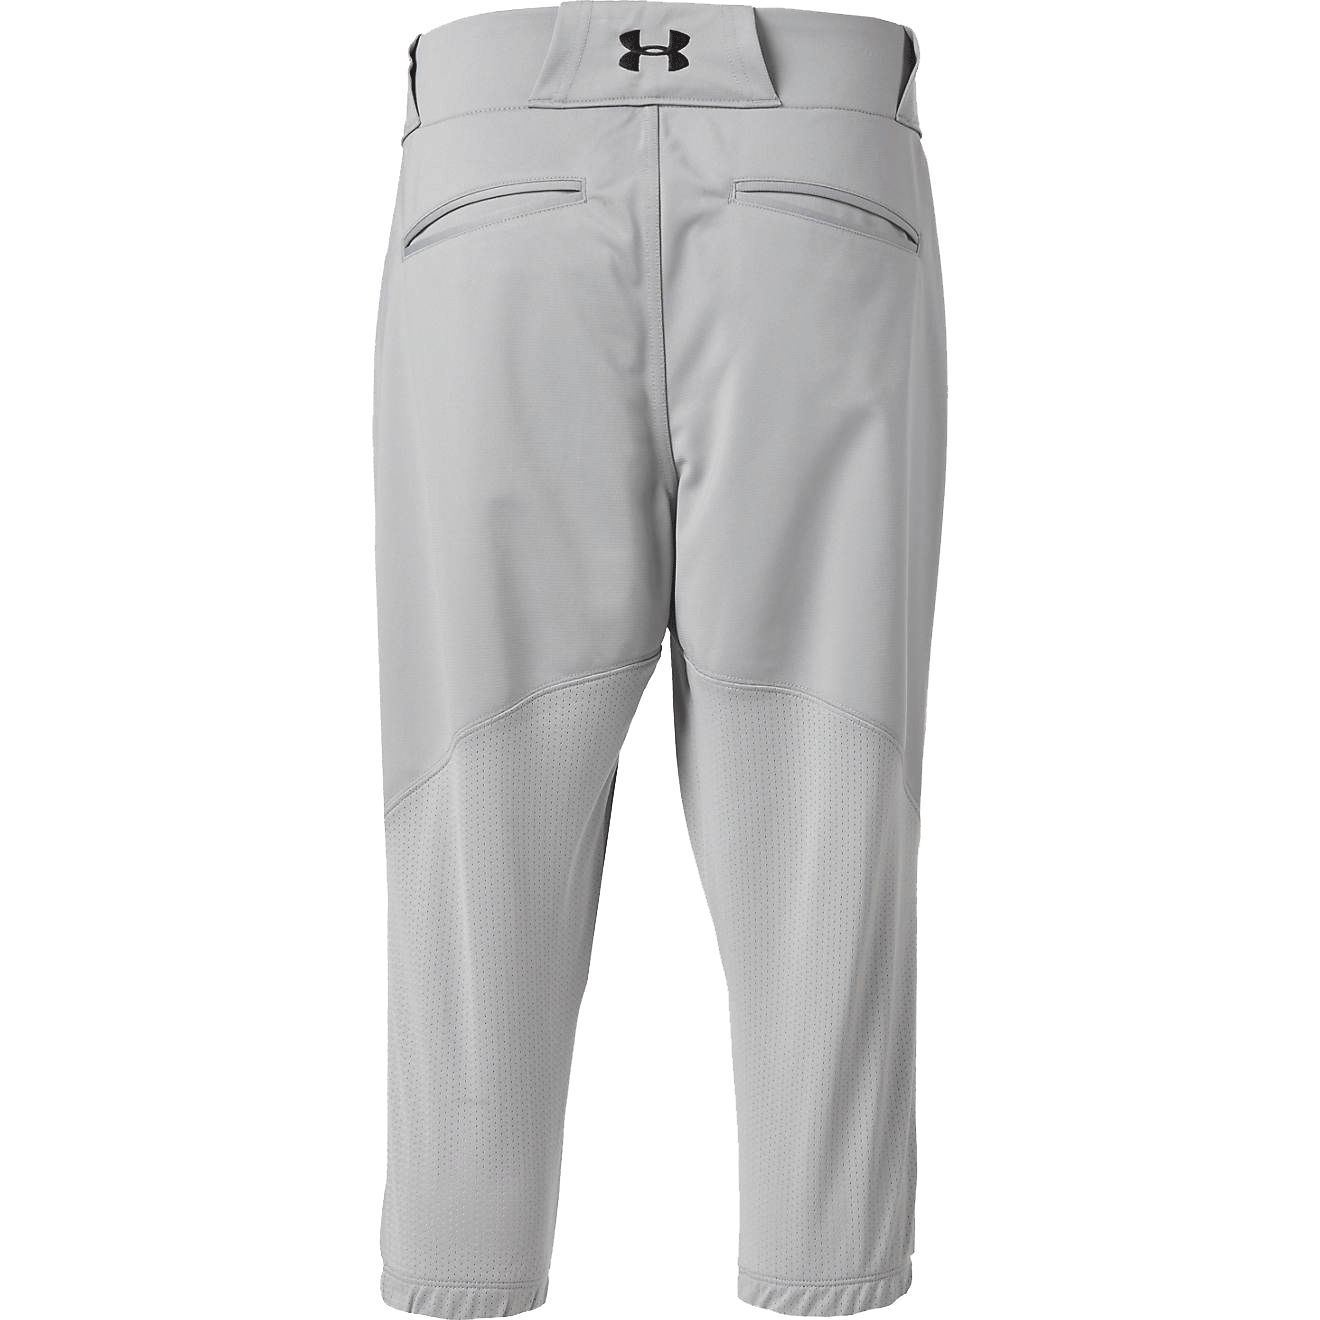 UA Girl's Ace Belted Knicker Pant